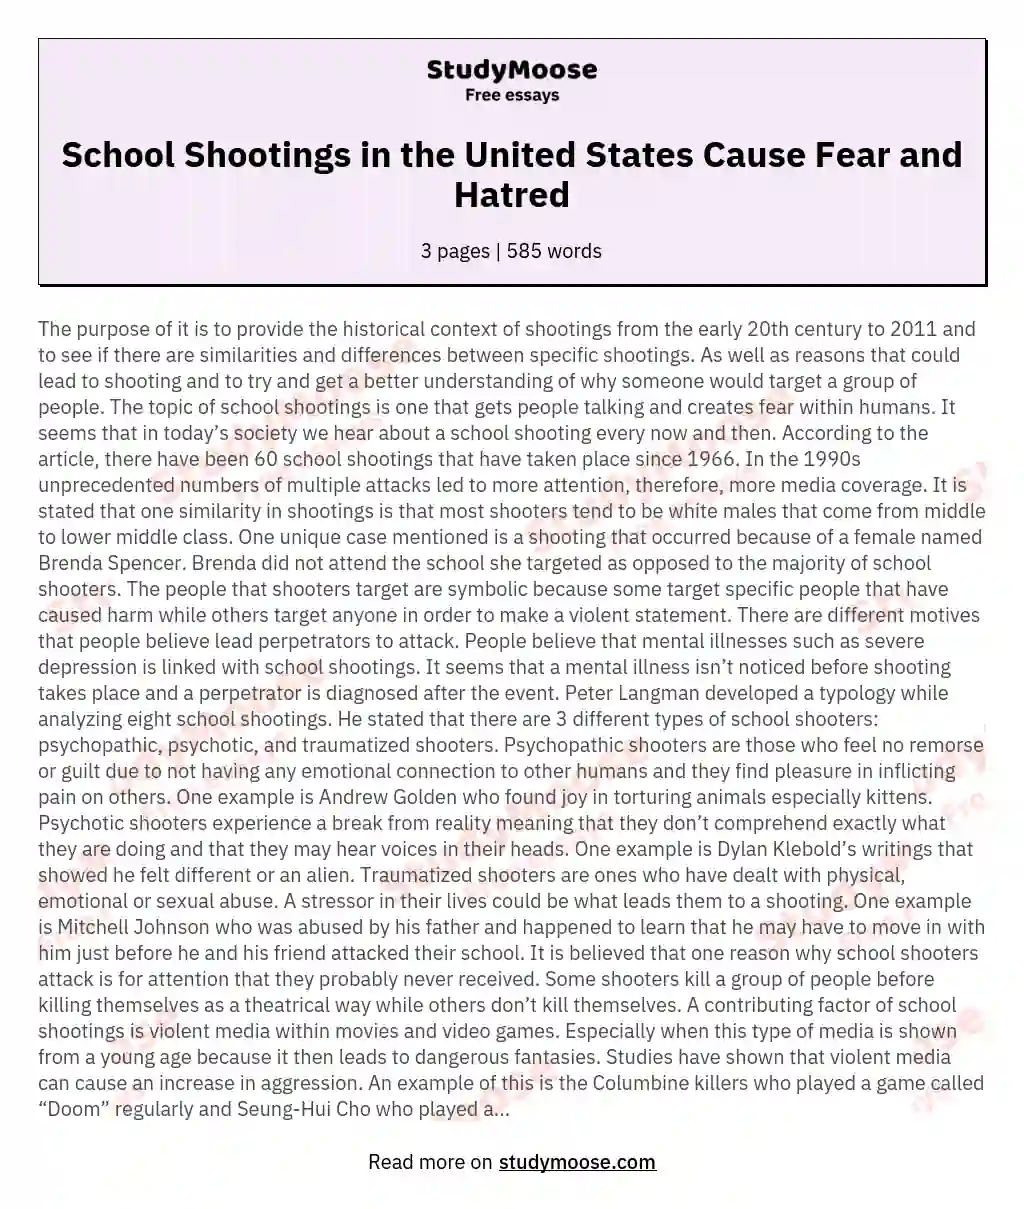 School Shootings in the United States Cause Fear and Hatred essay